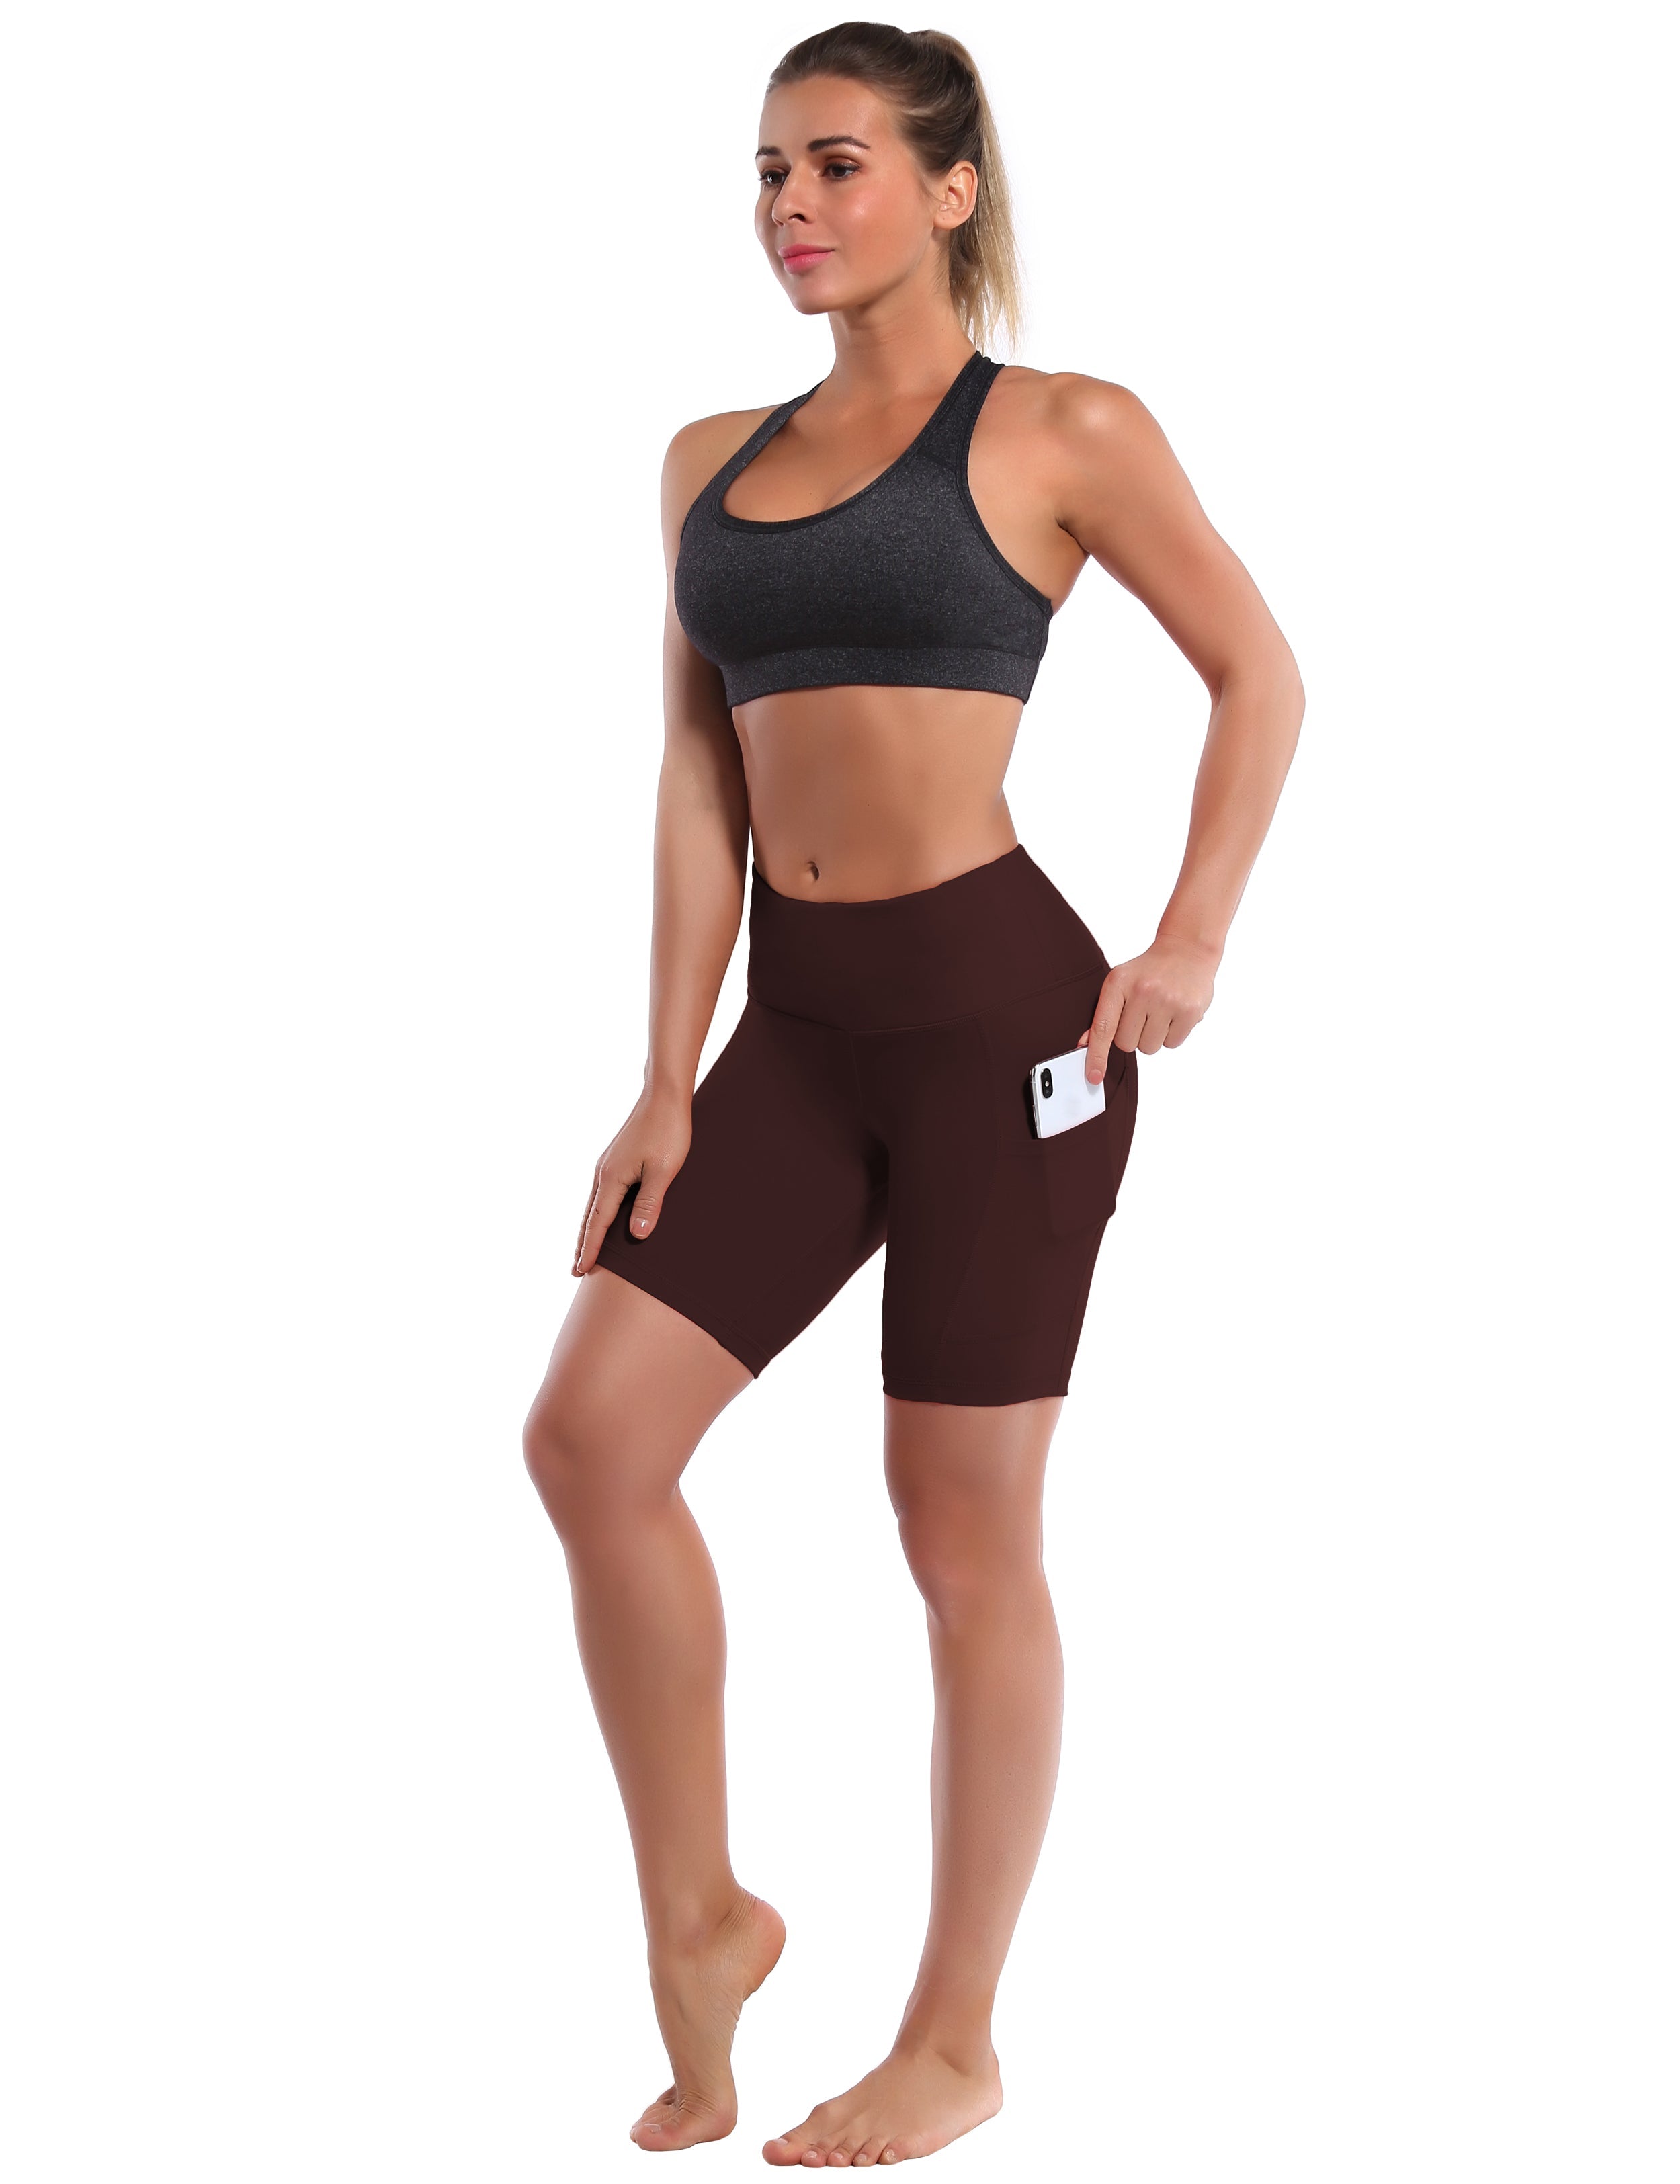 8" Side Pockets Biking Shorts mahoganymaroon Sleek, soft, smooth and totally comfortable: our newest style is here. Softest-ever fabric High elasticity High density 4-way stretch Fabric doesn't attract lint easily No see-through Moisture-wicking Machine wash 75% Nylon, 25% Spandex